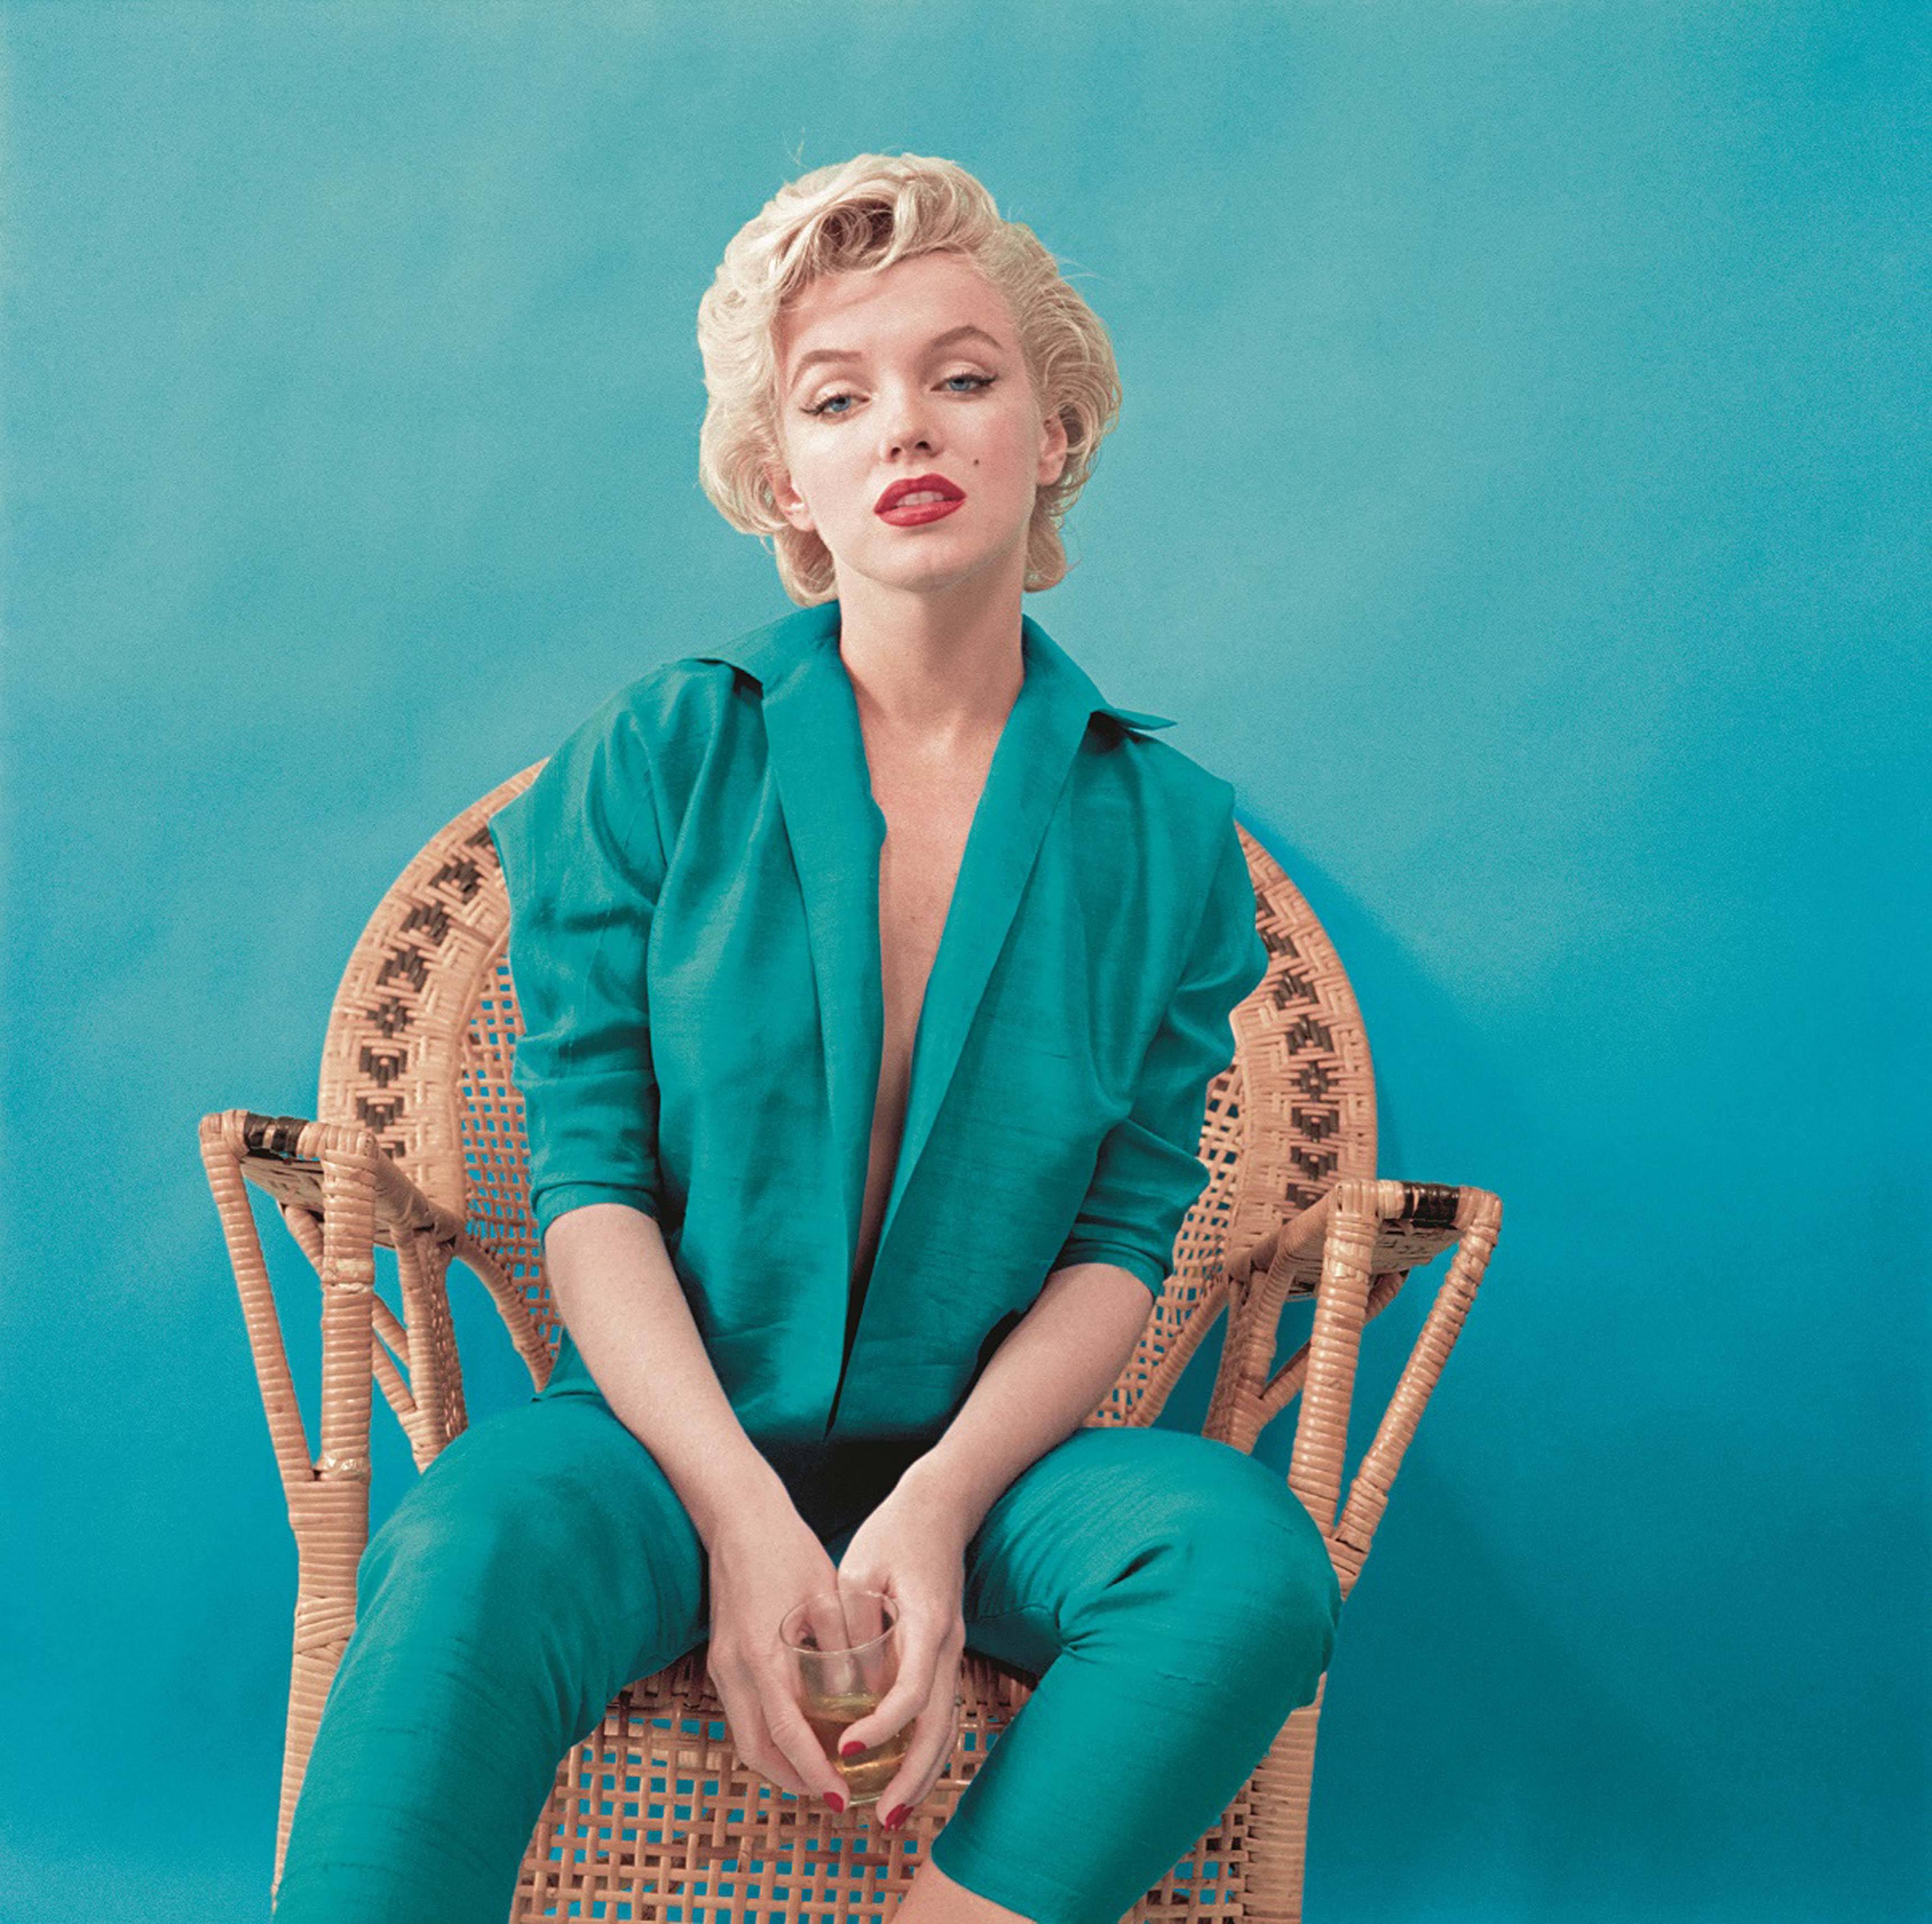 Photographed by Milton H. Greene - The Essential Marilyn Monroe, published by ACC Editions ©2017 Joshua